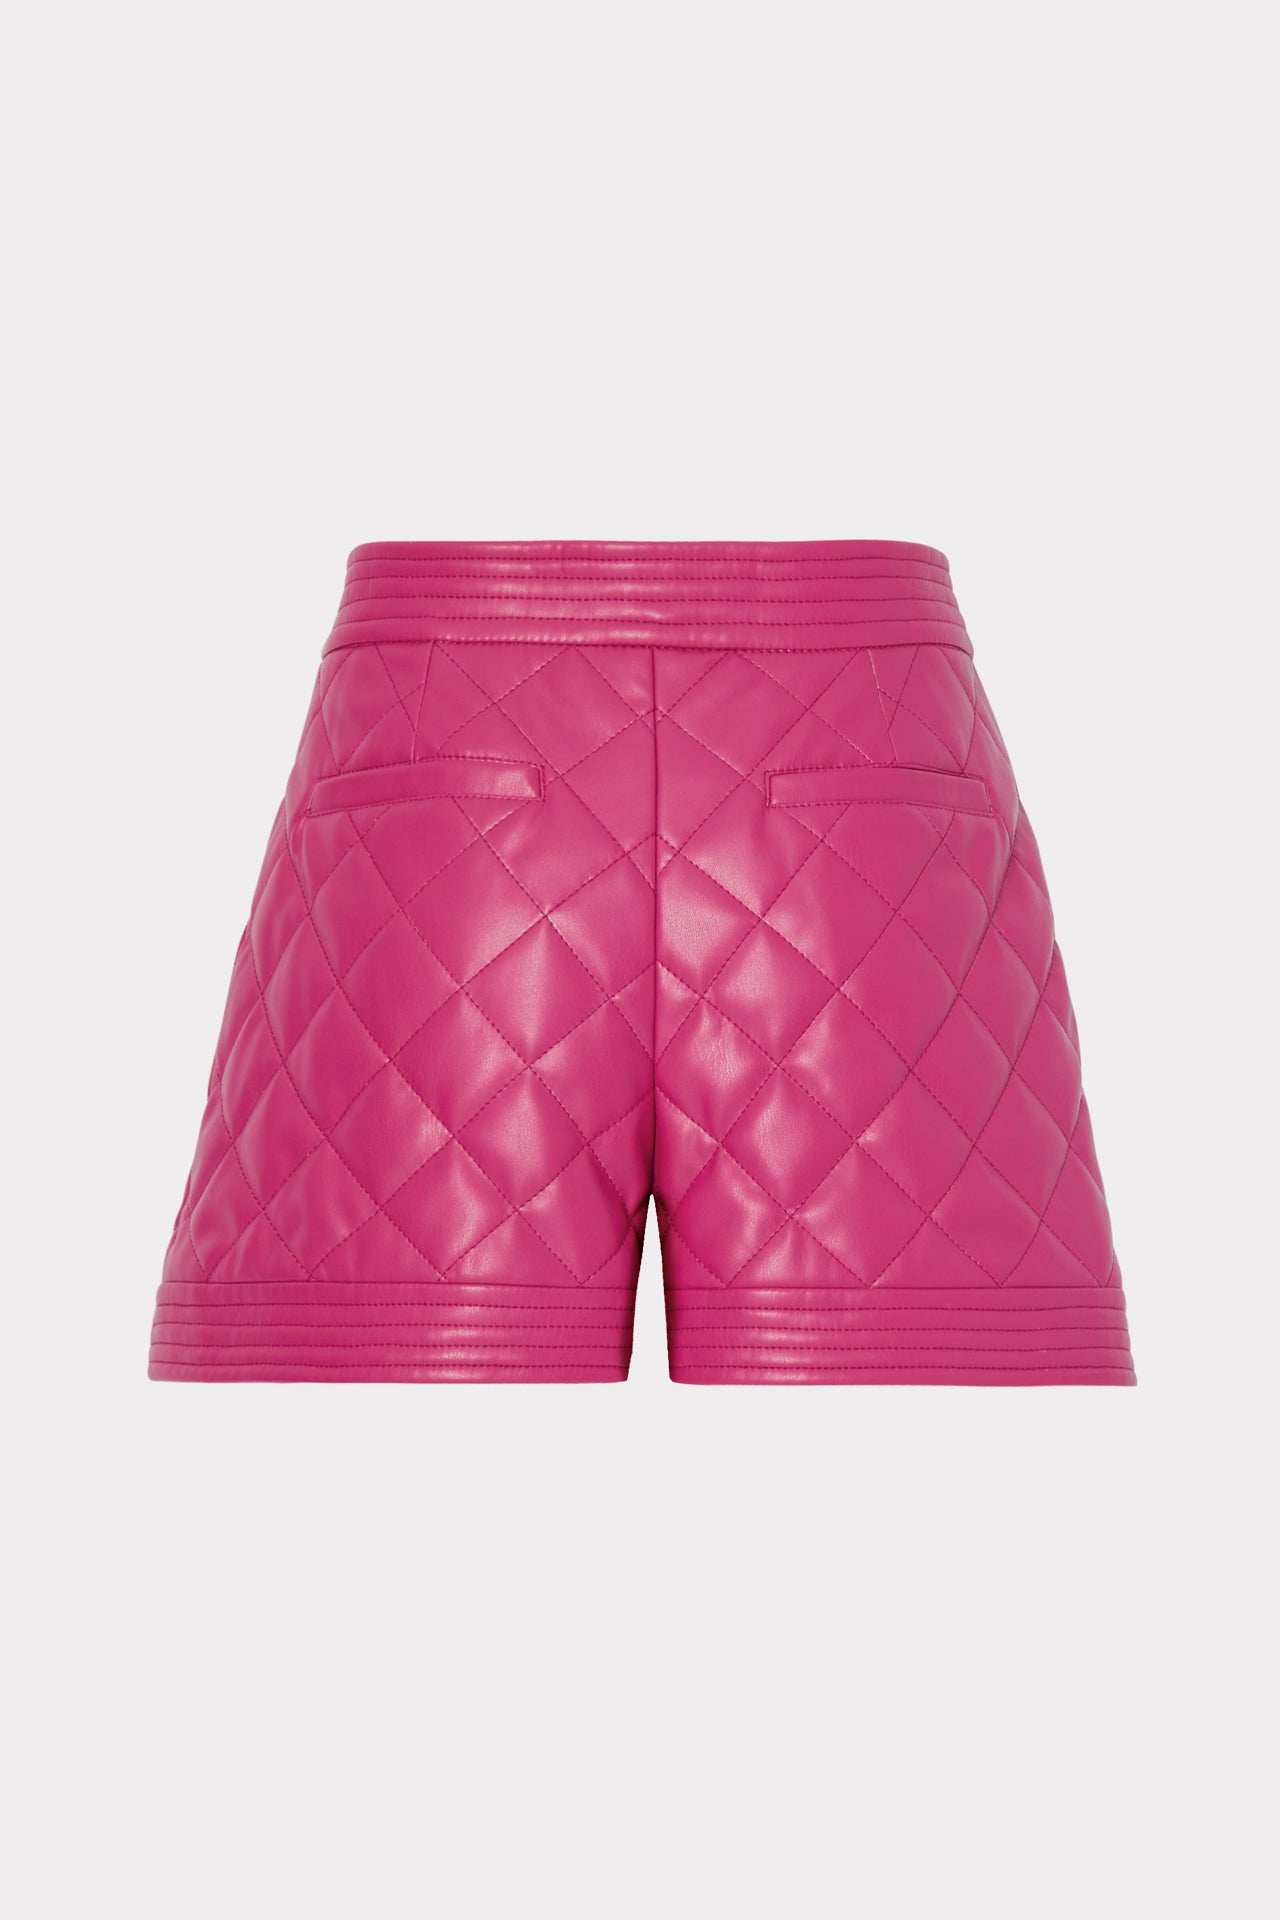 Heather Quilted Vegan Leather Shorts